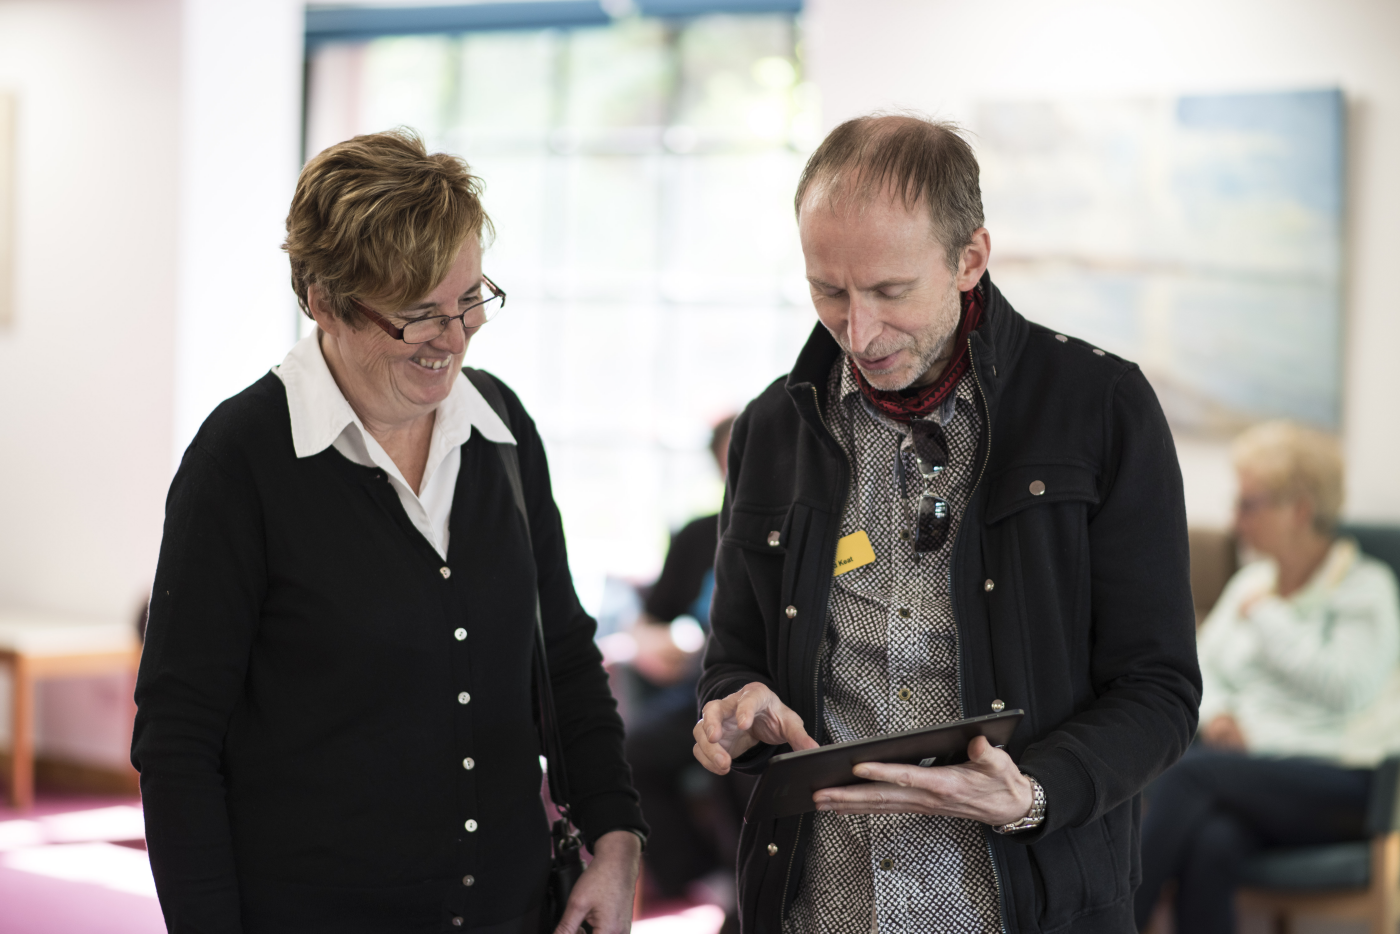 iSightCornwall Assistive Technology Officer, Rodney Keats speak with a client at a sight loss awareness event. Rod is holding a tablet computer.